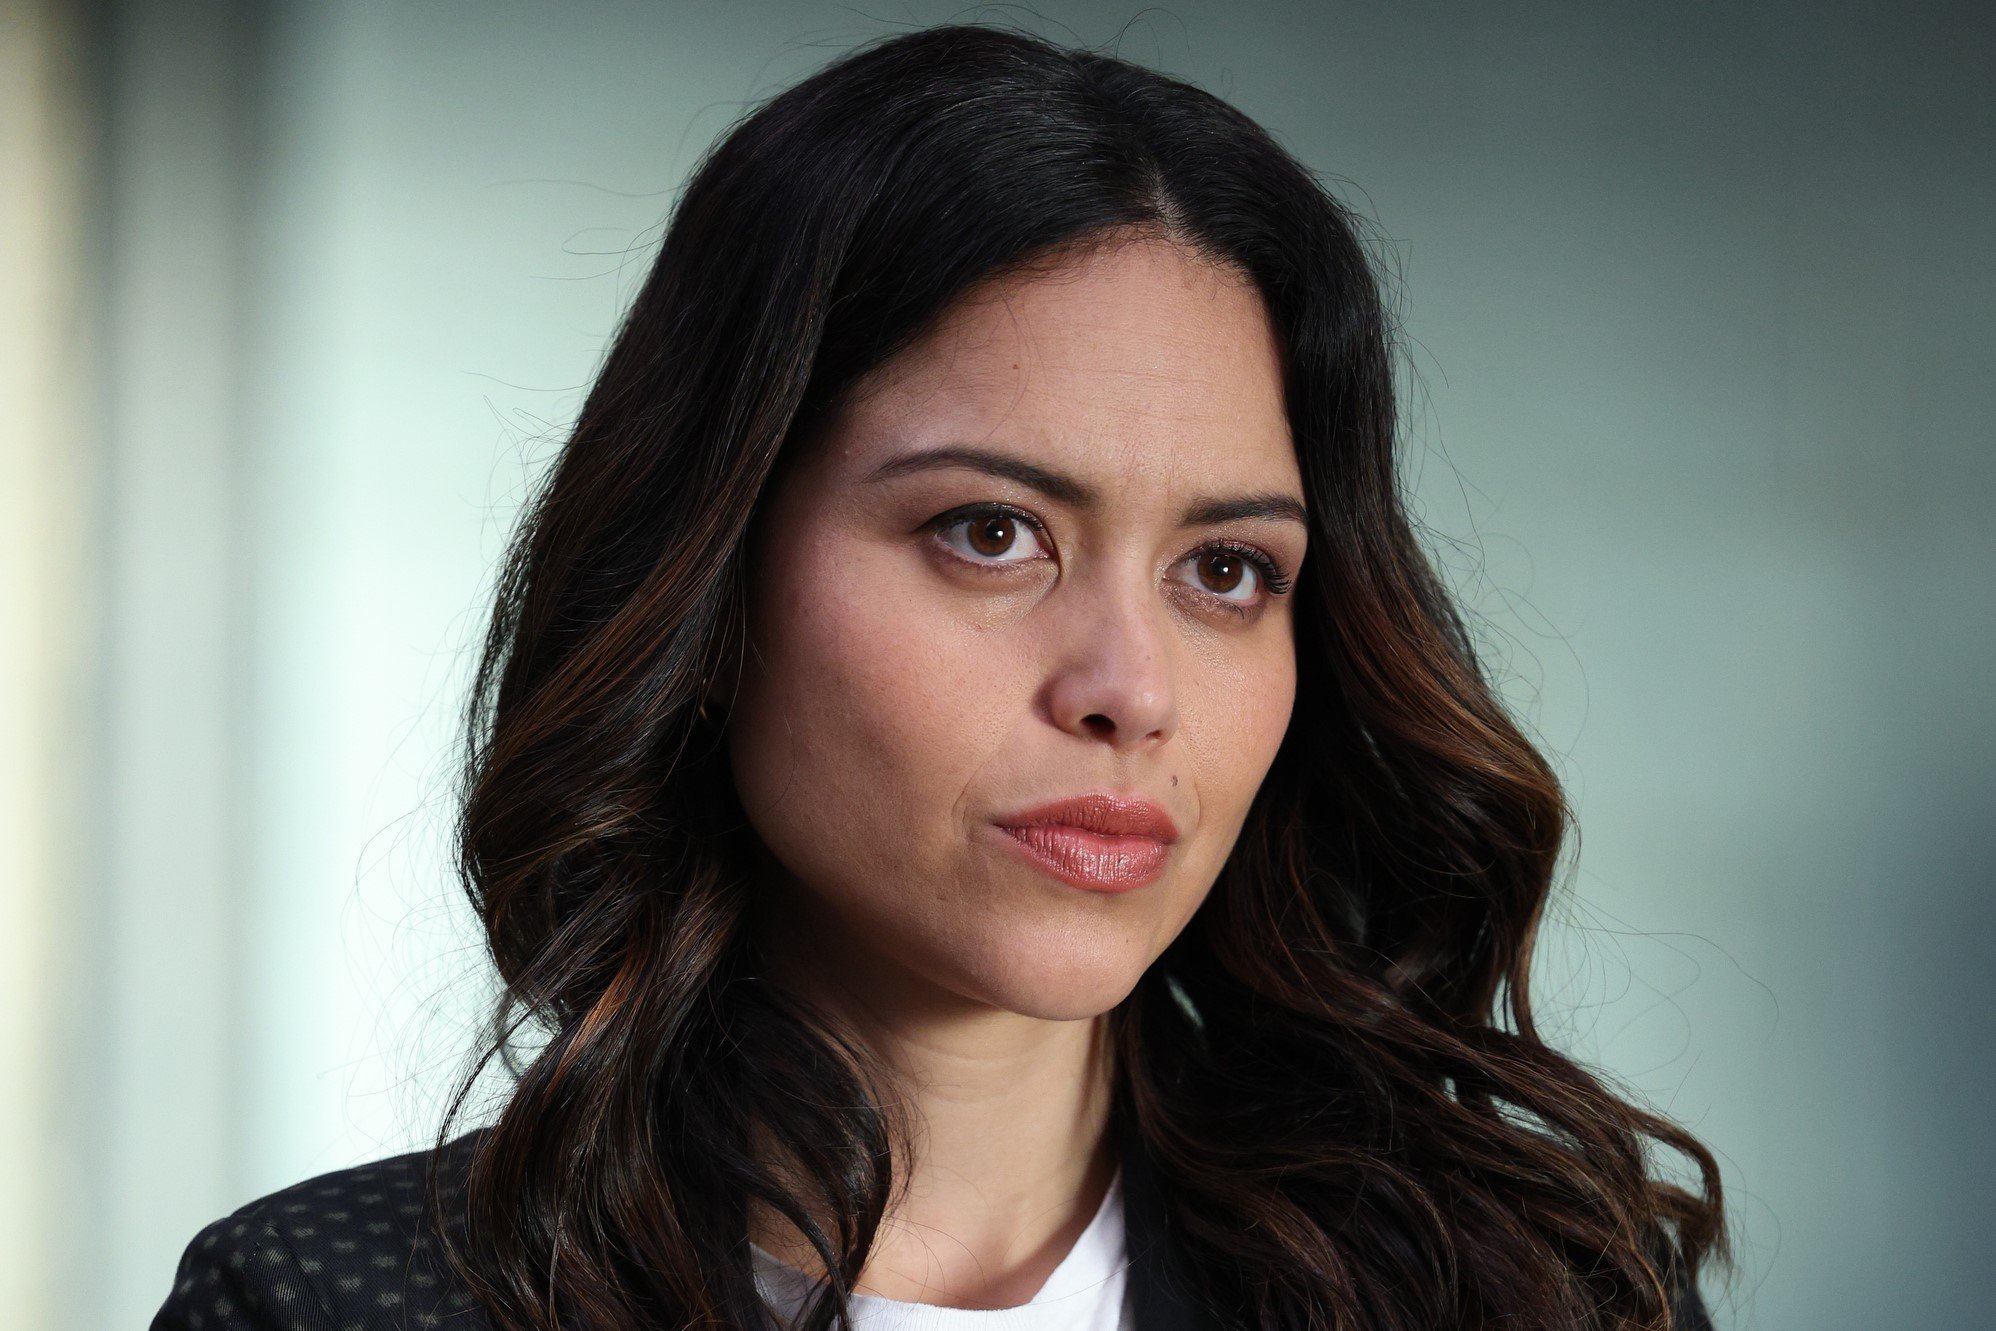 Alyssa Diaz, who stars as Angela Lopez in 'The Rookie' Season 5 Episode 15 on ABC, wears a black suit over a white shirt.